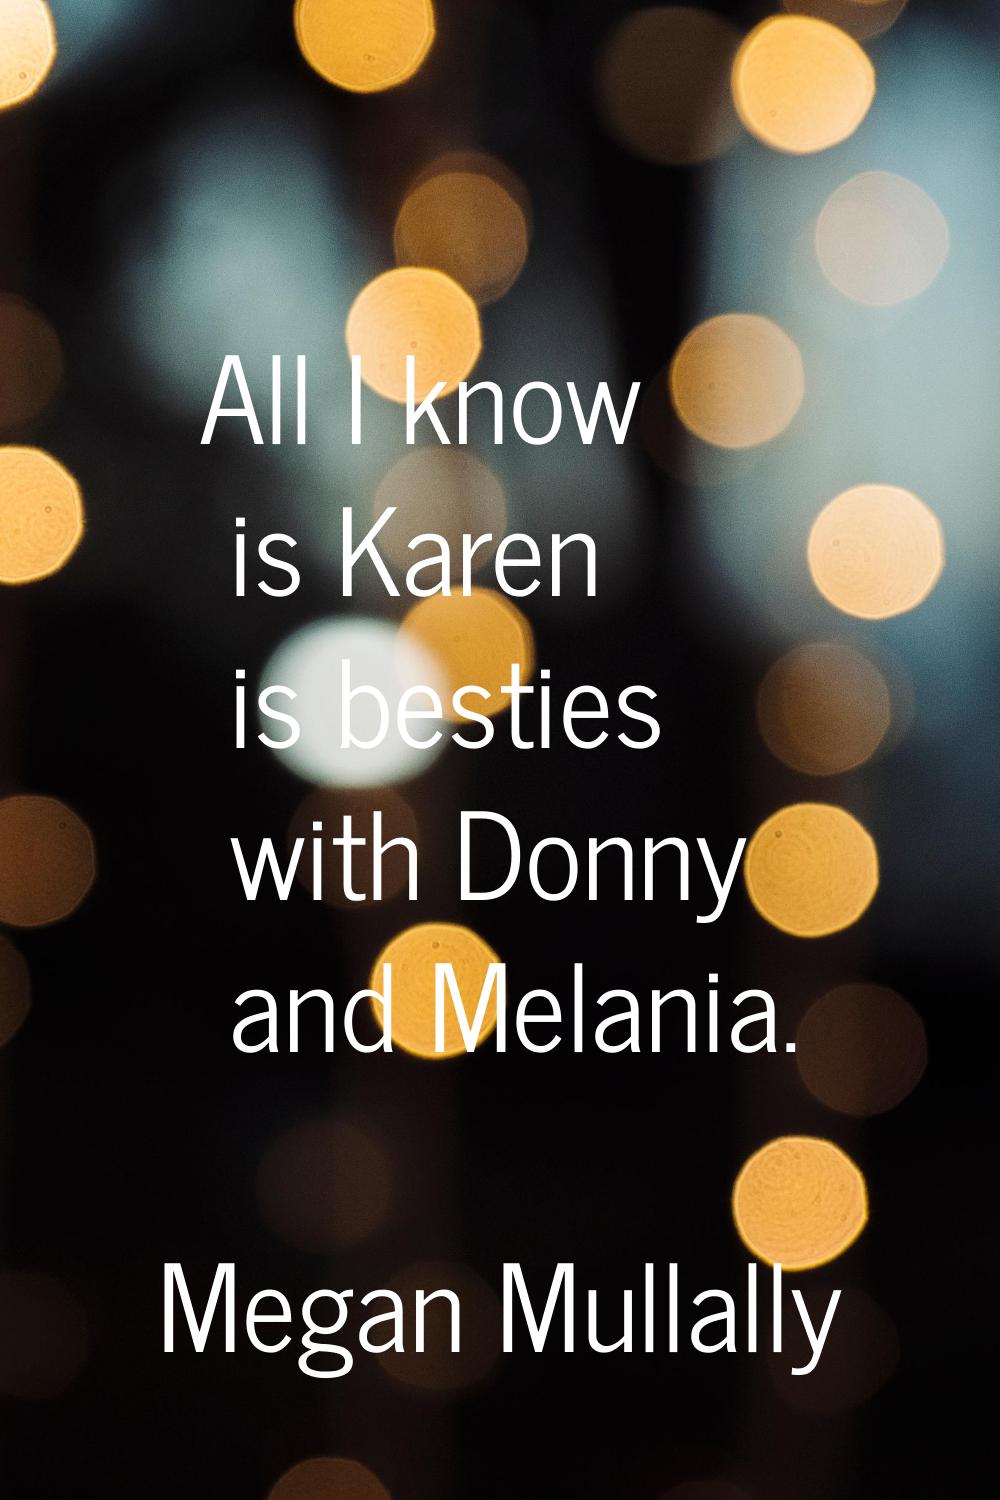 All I know is Karen is besties with Donny and Melania.